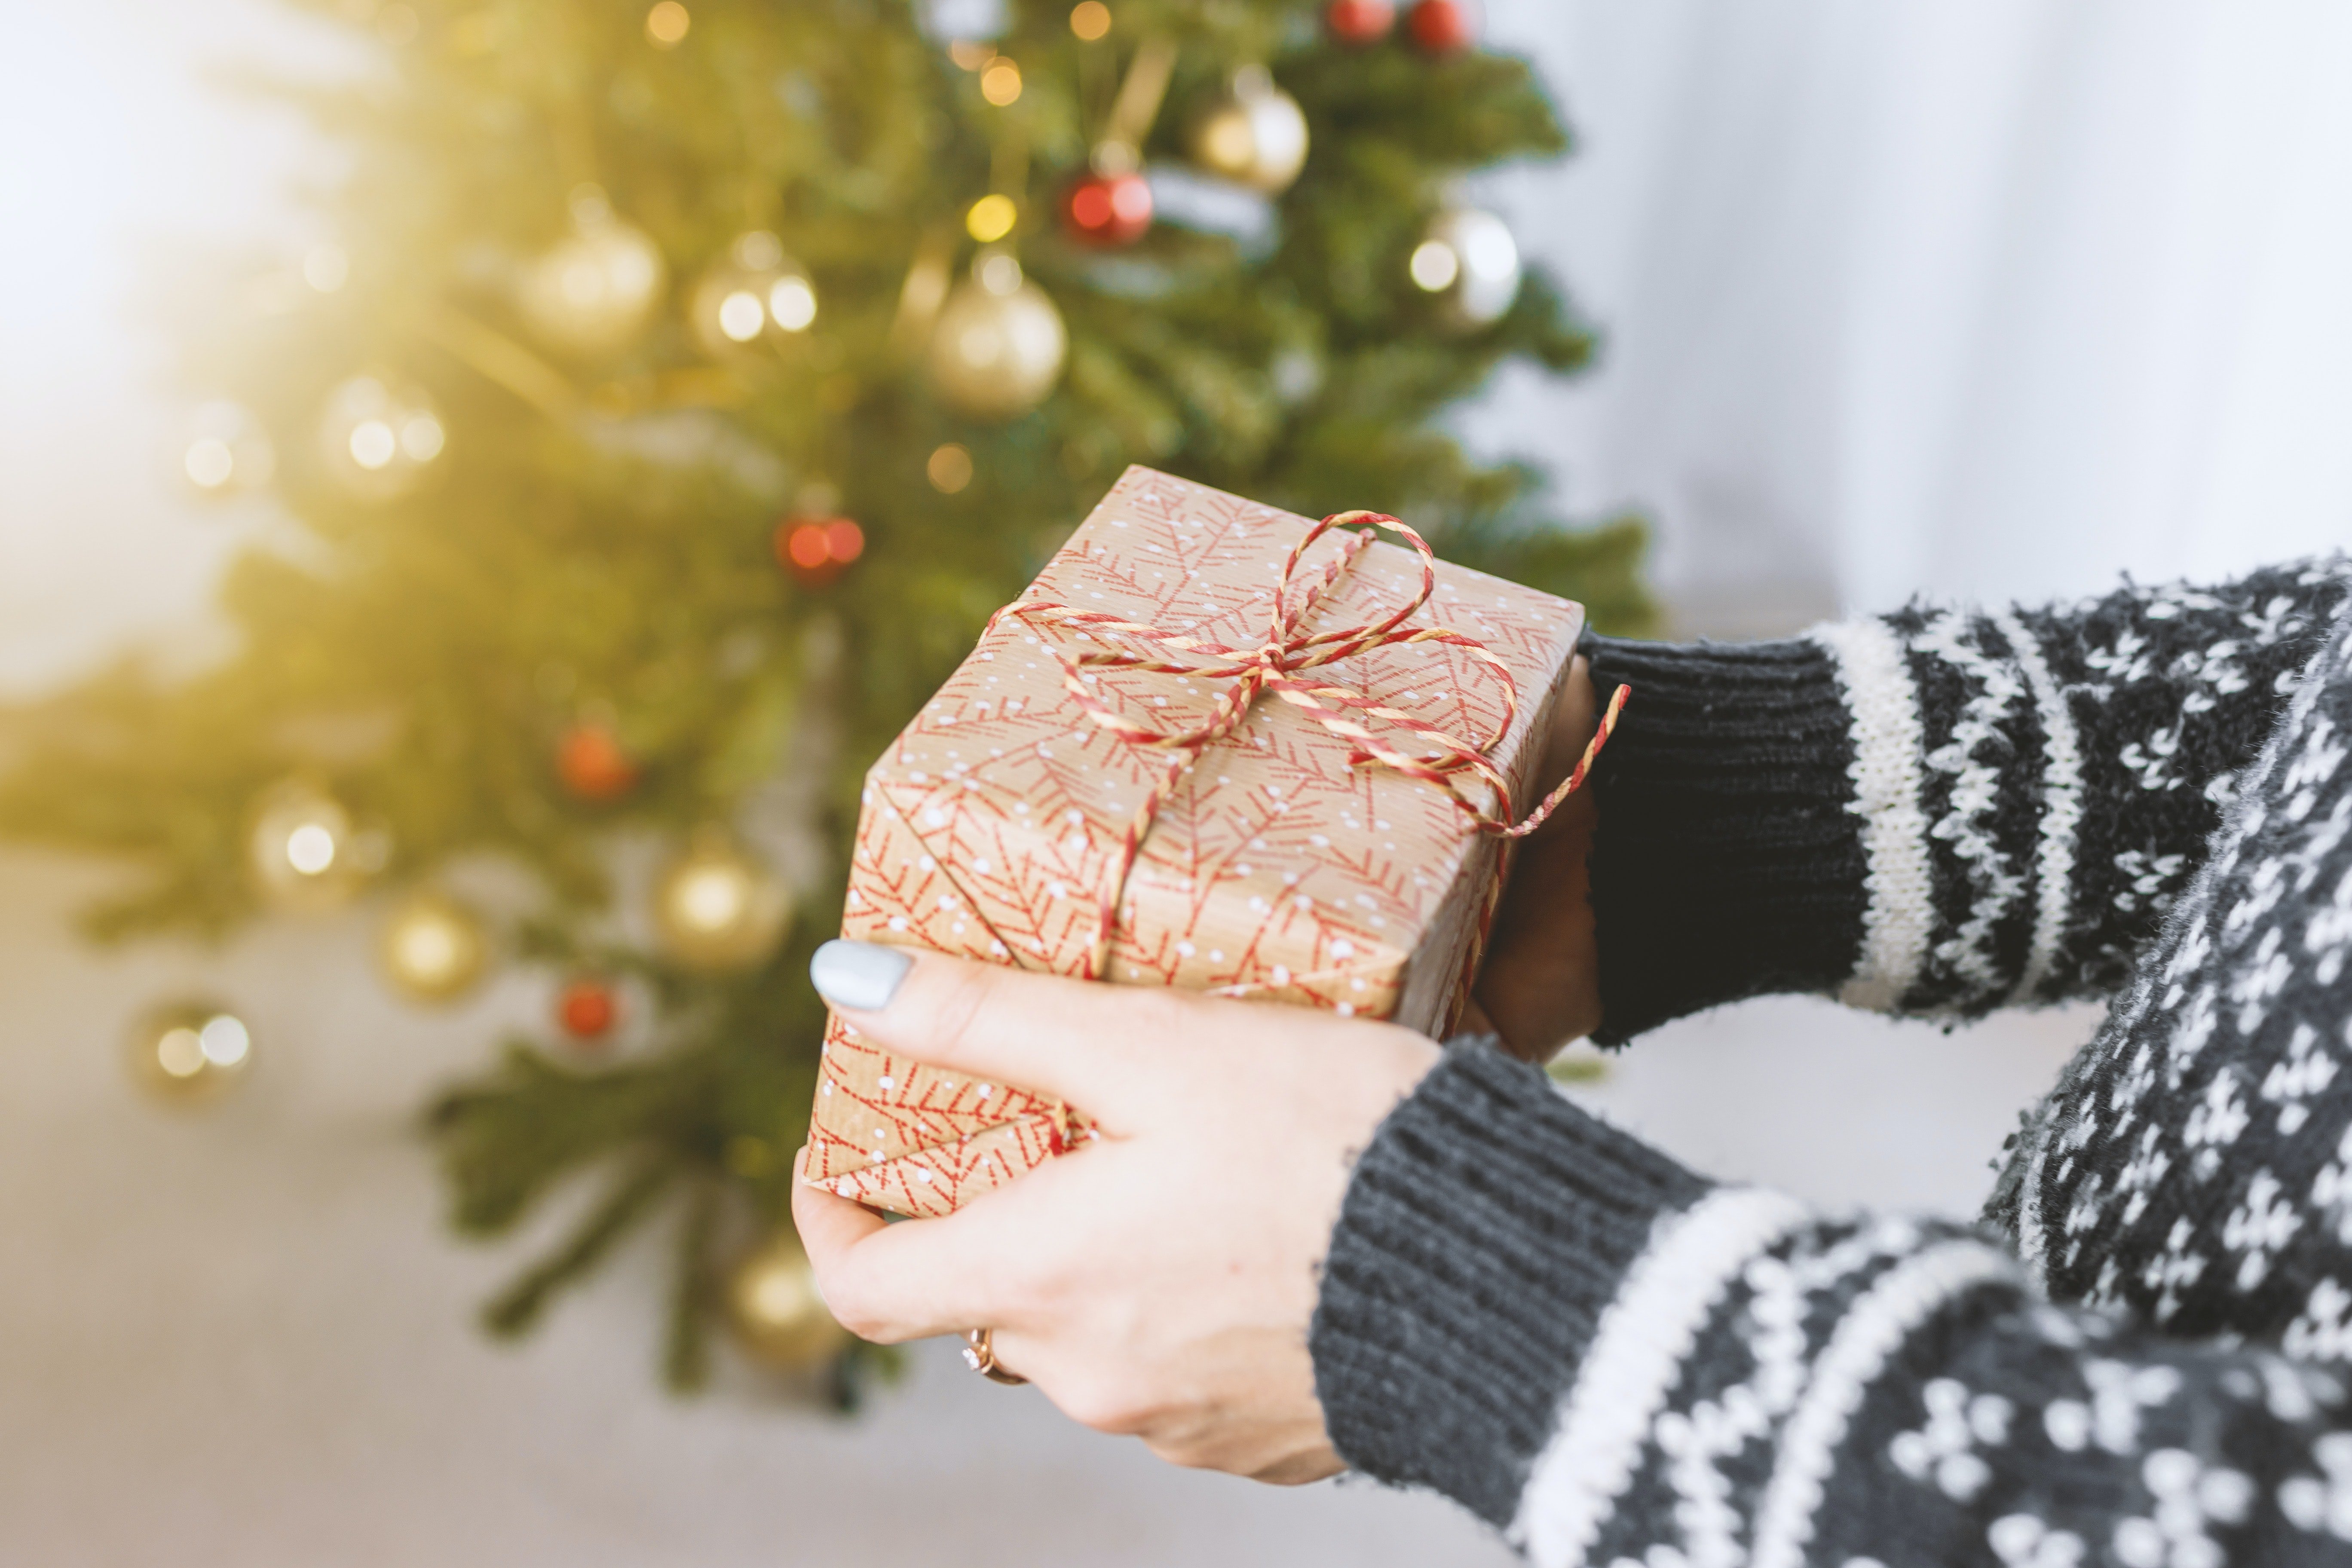 OP bought gifts for her family members too & was unsure if it was right considering her financial situation | Photo: Unsplash  